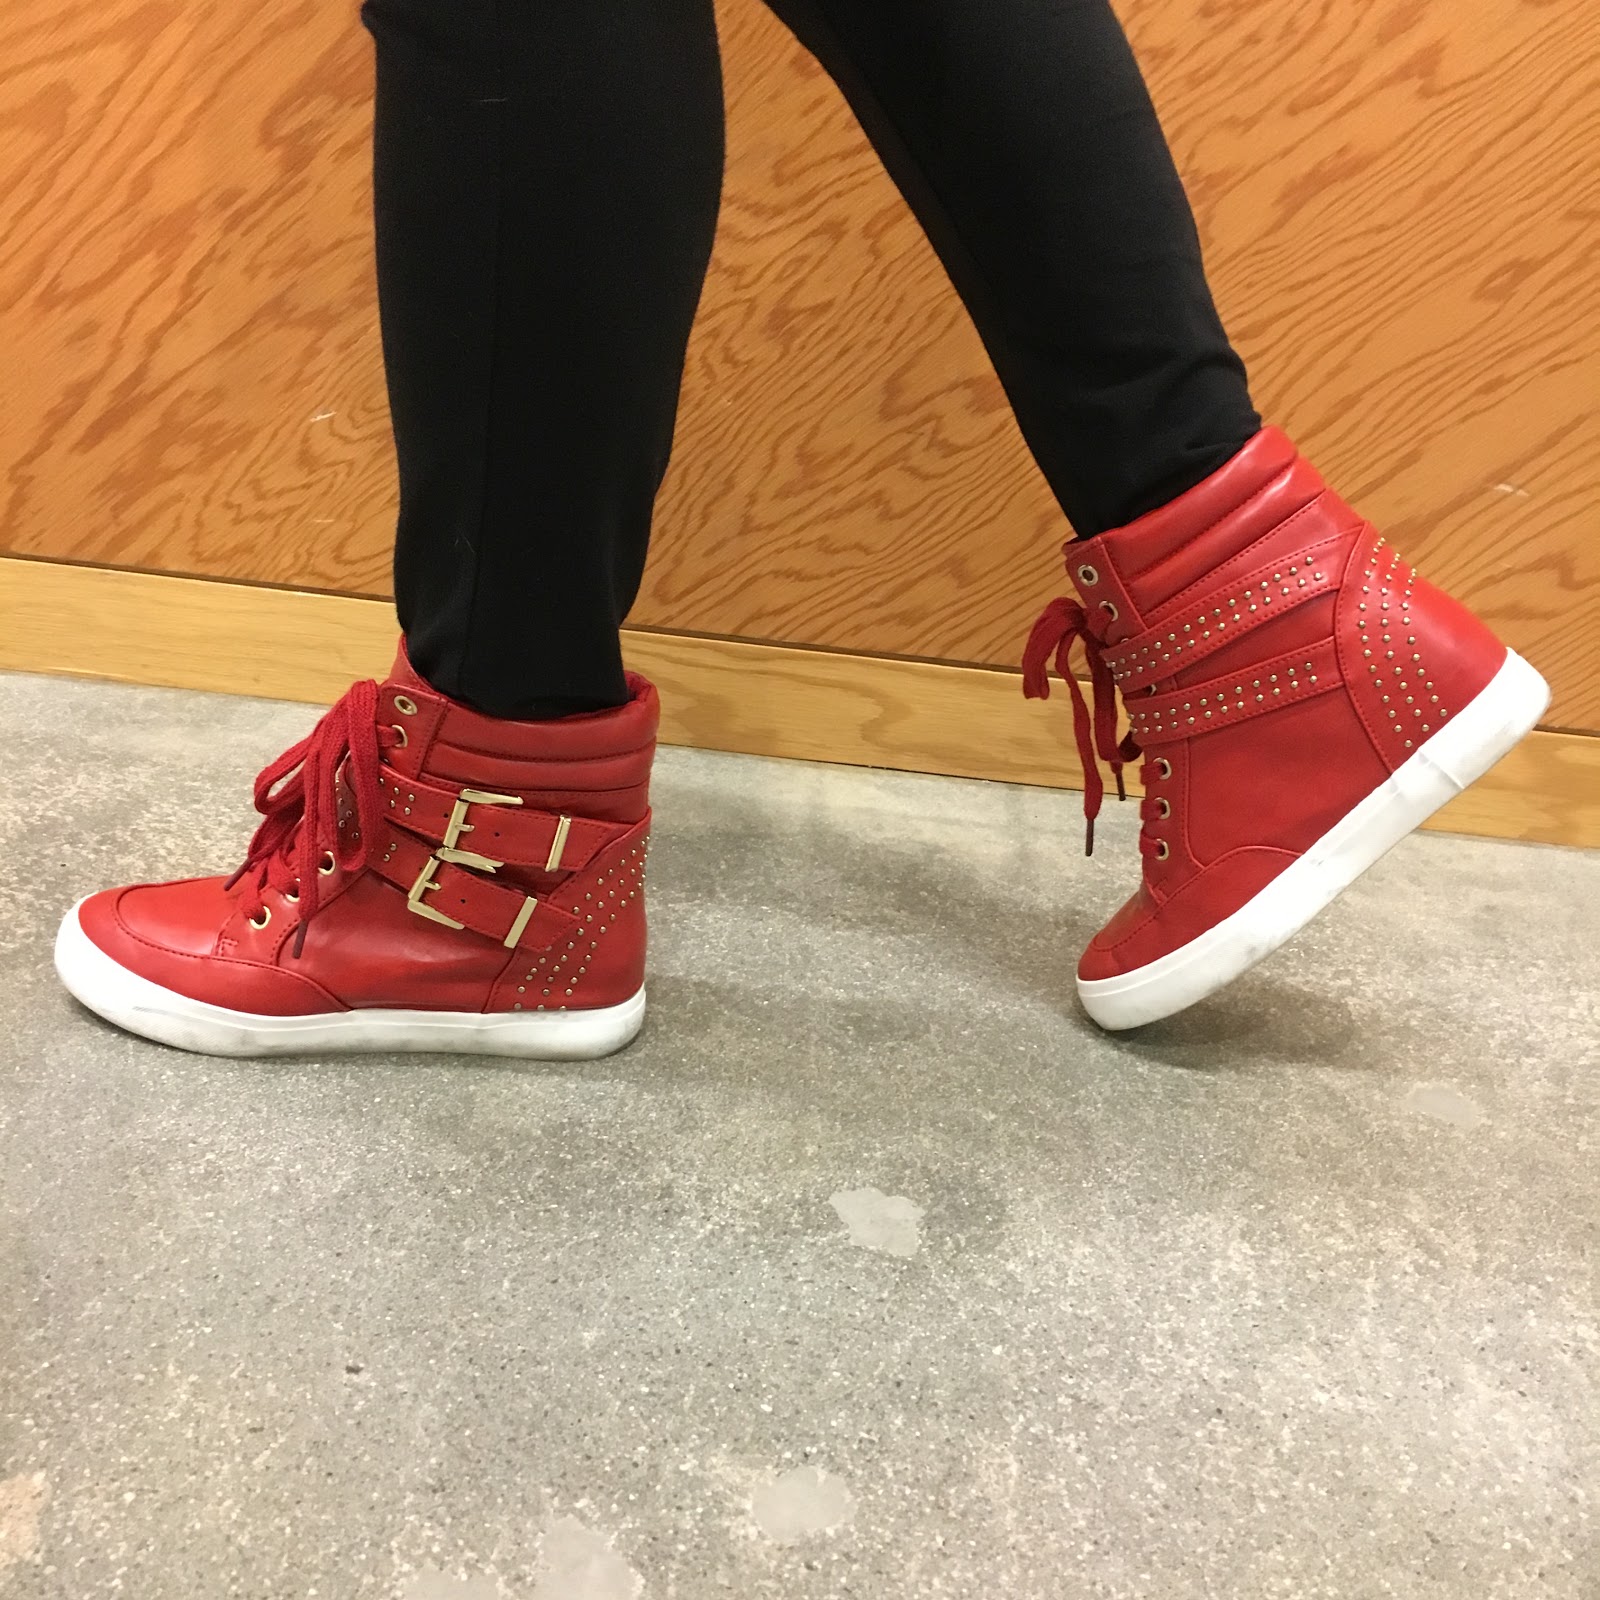 The of #TuesdayShoesday: JustFab Red Studded Sneakers